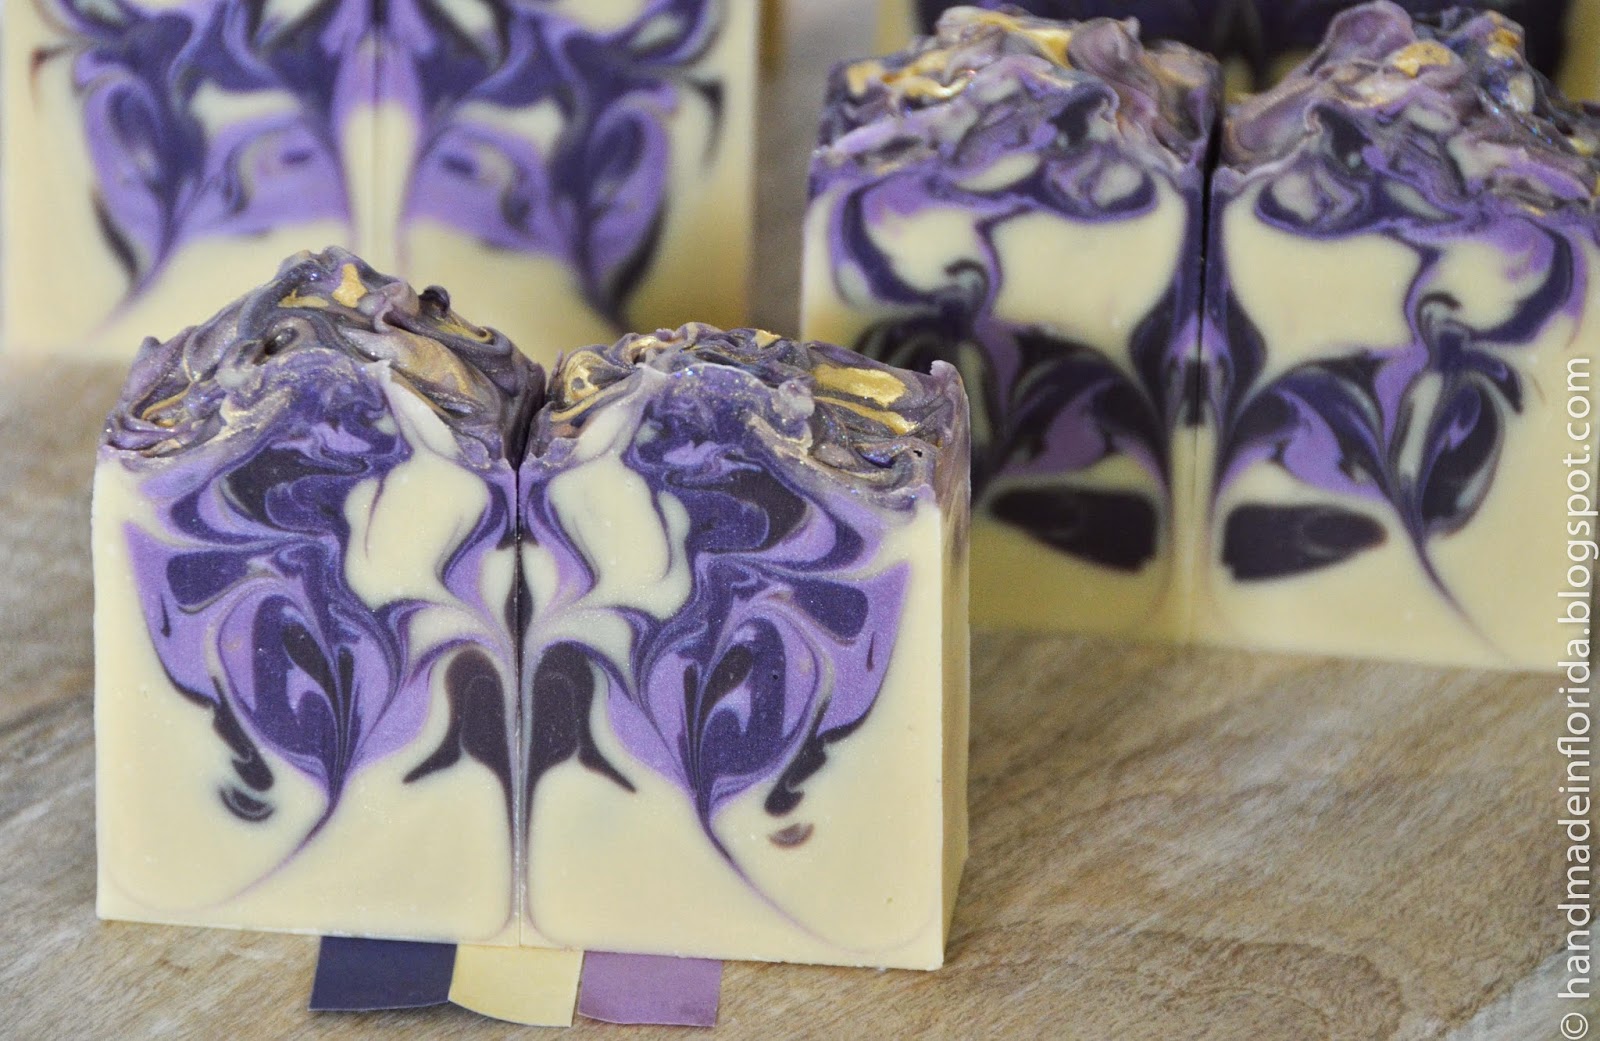 Butterfly Soap - Handcrafted